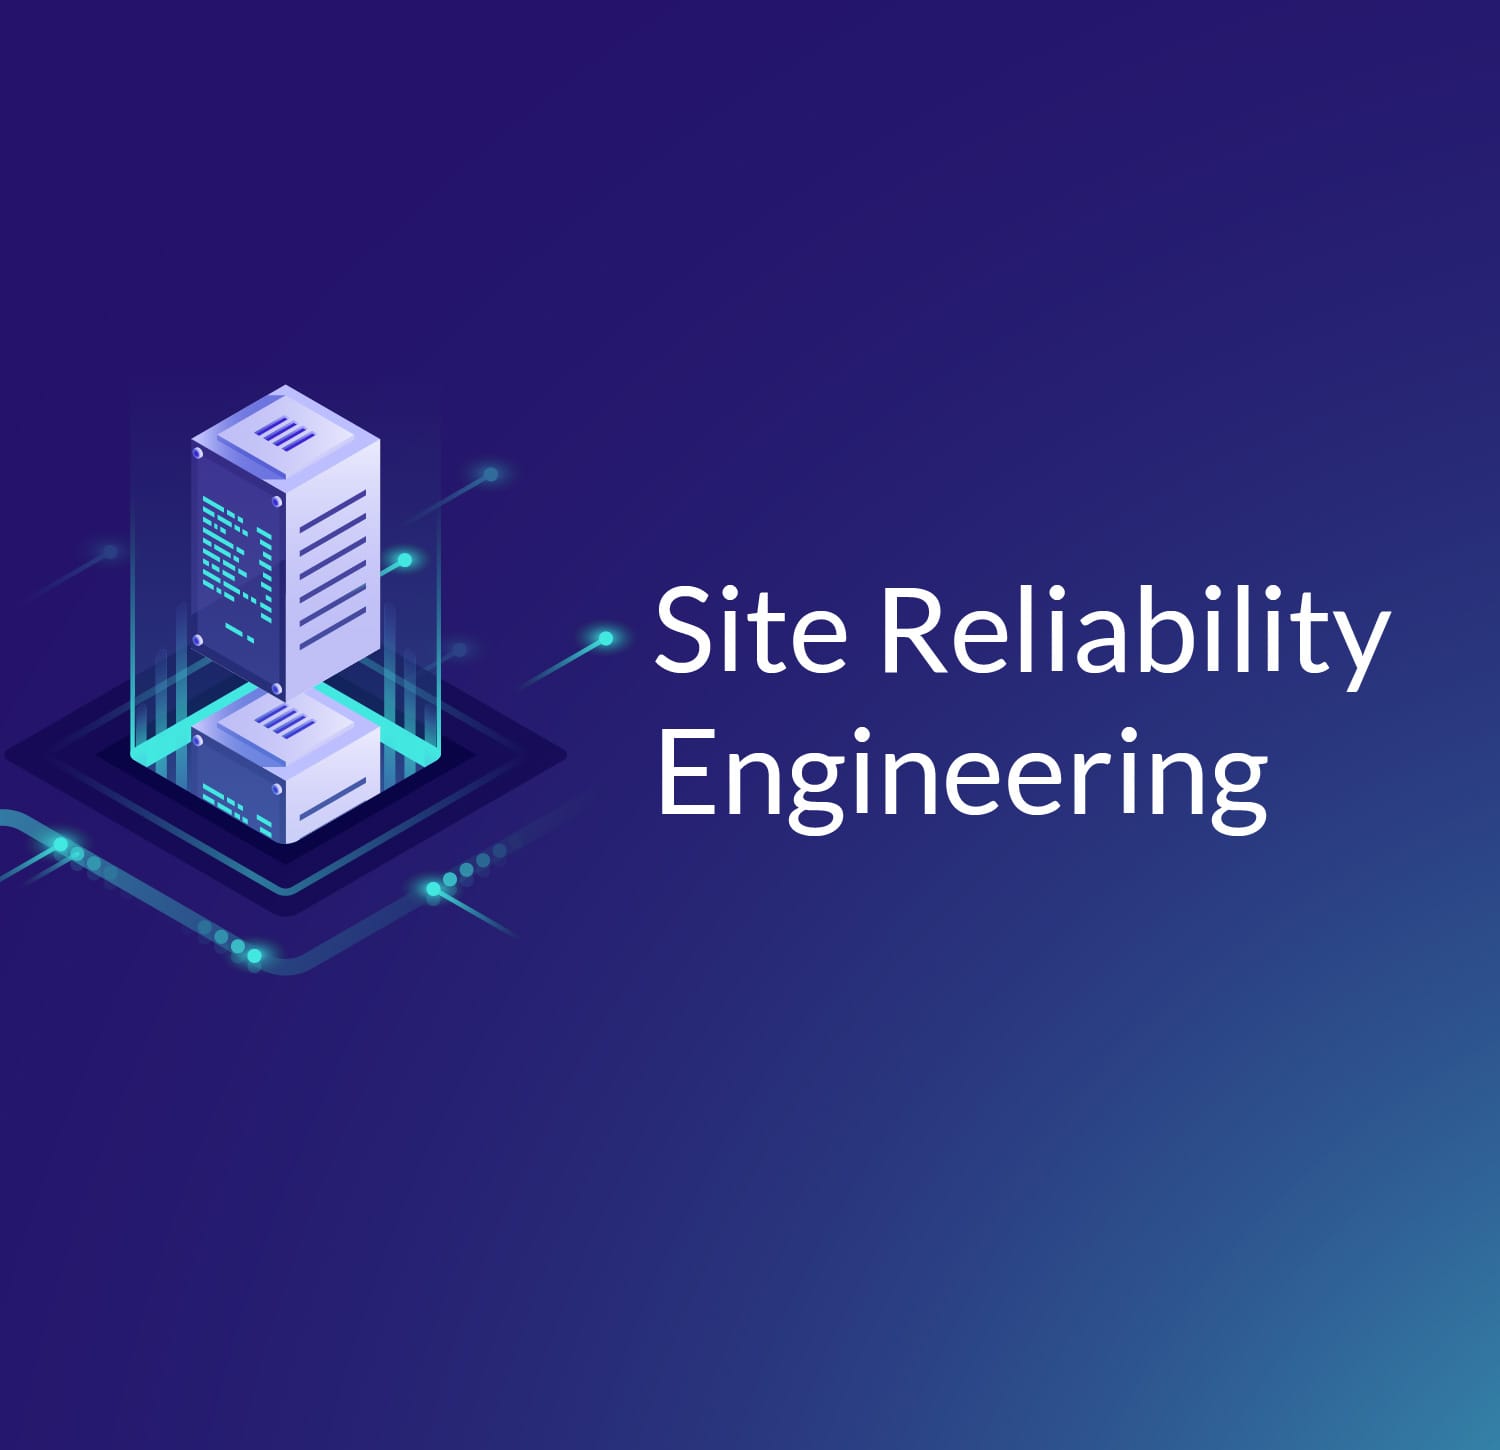 Site Reliability Engineering written on blue background and chip on the other side of the picture